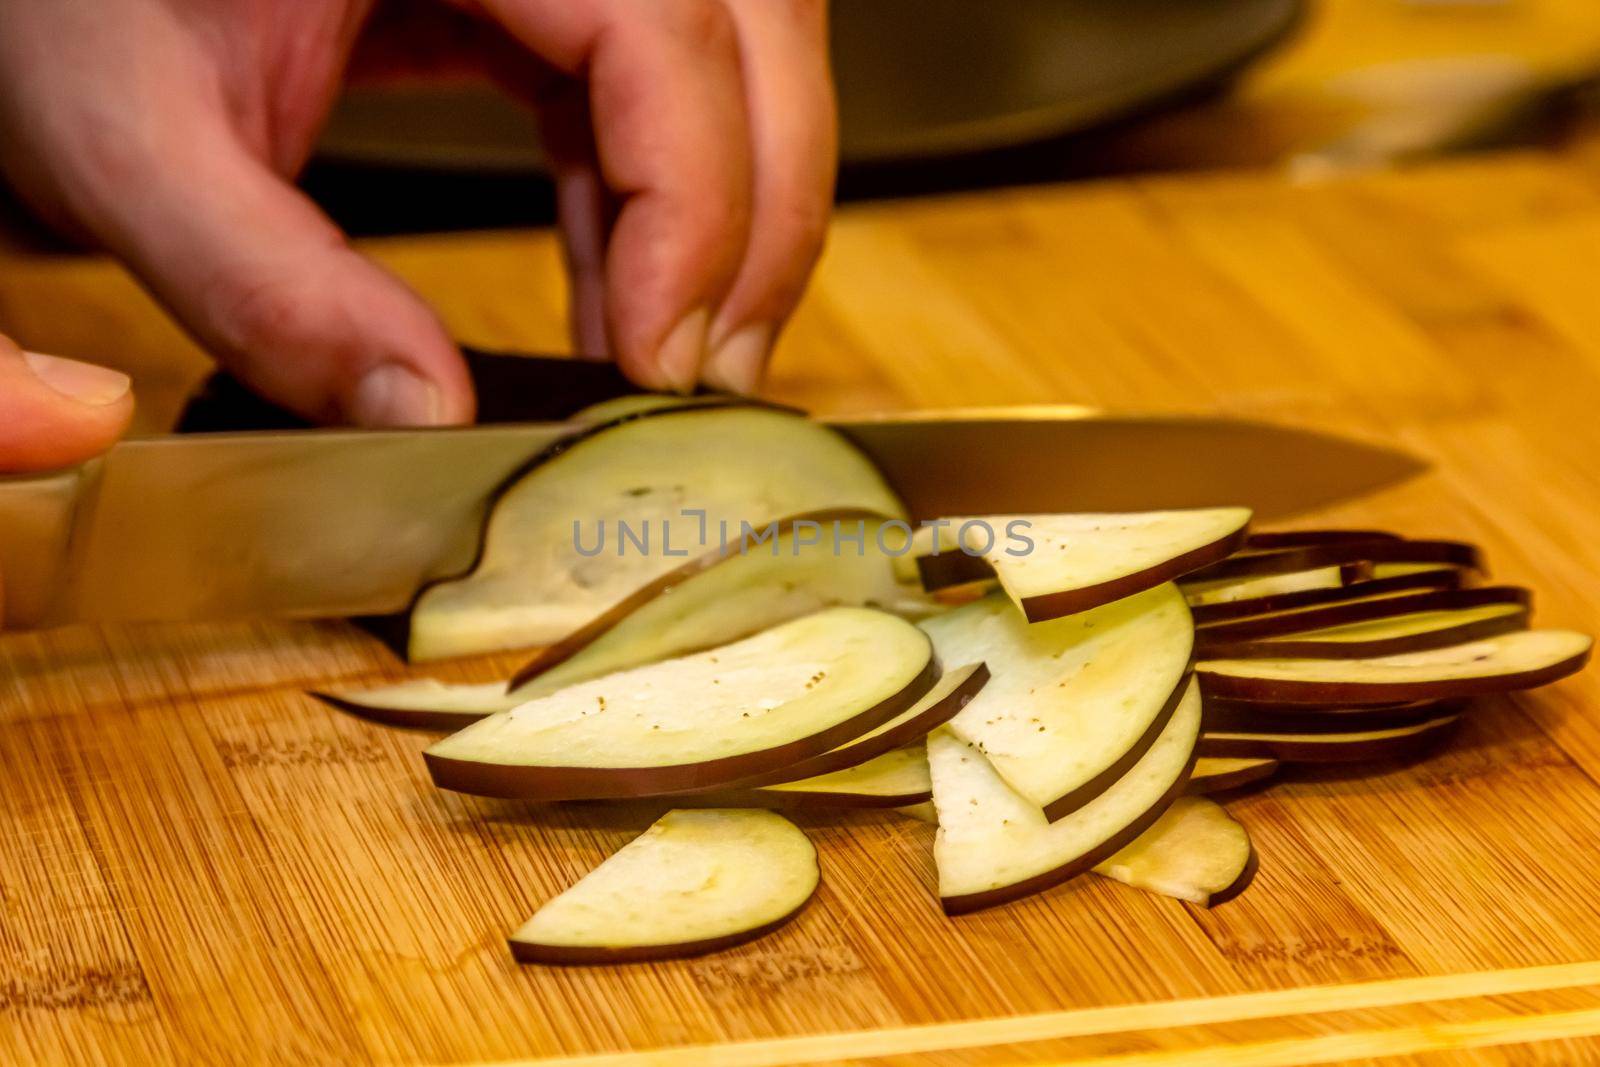 The cook cuts an eggplant on a cutting board. The process of preparing a vegetable dish. Unrecognizable person. by Milanchikov